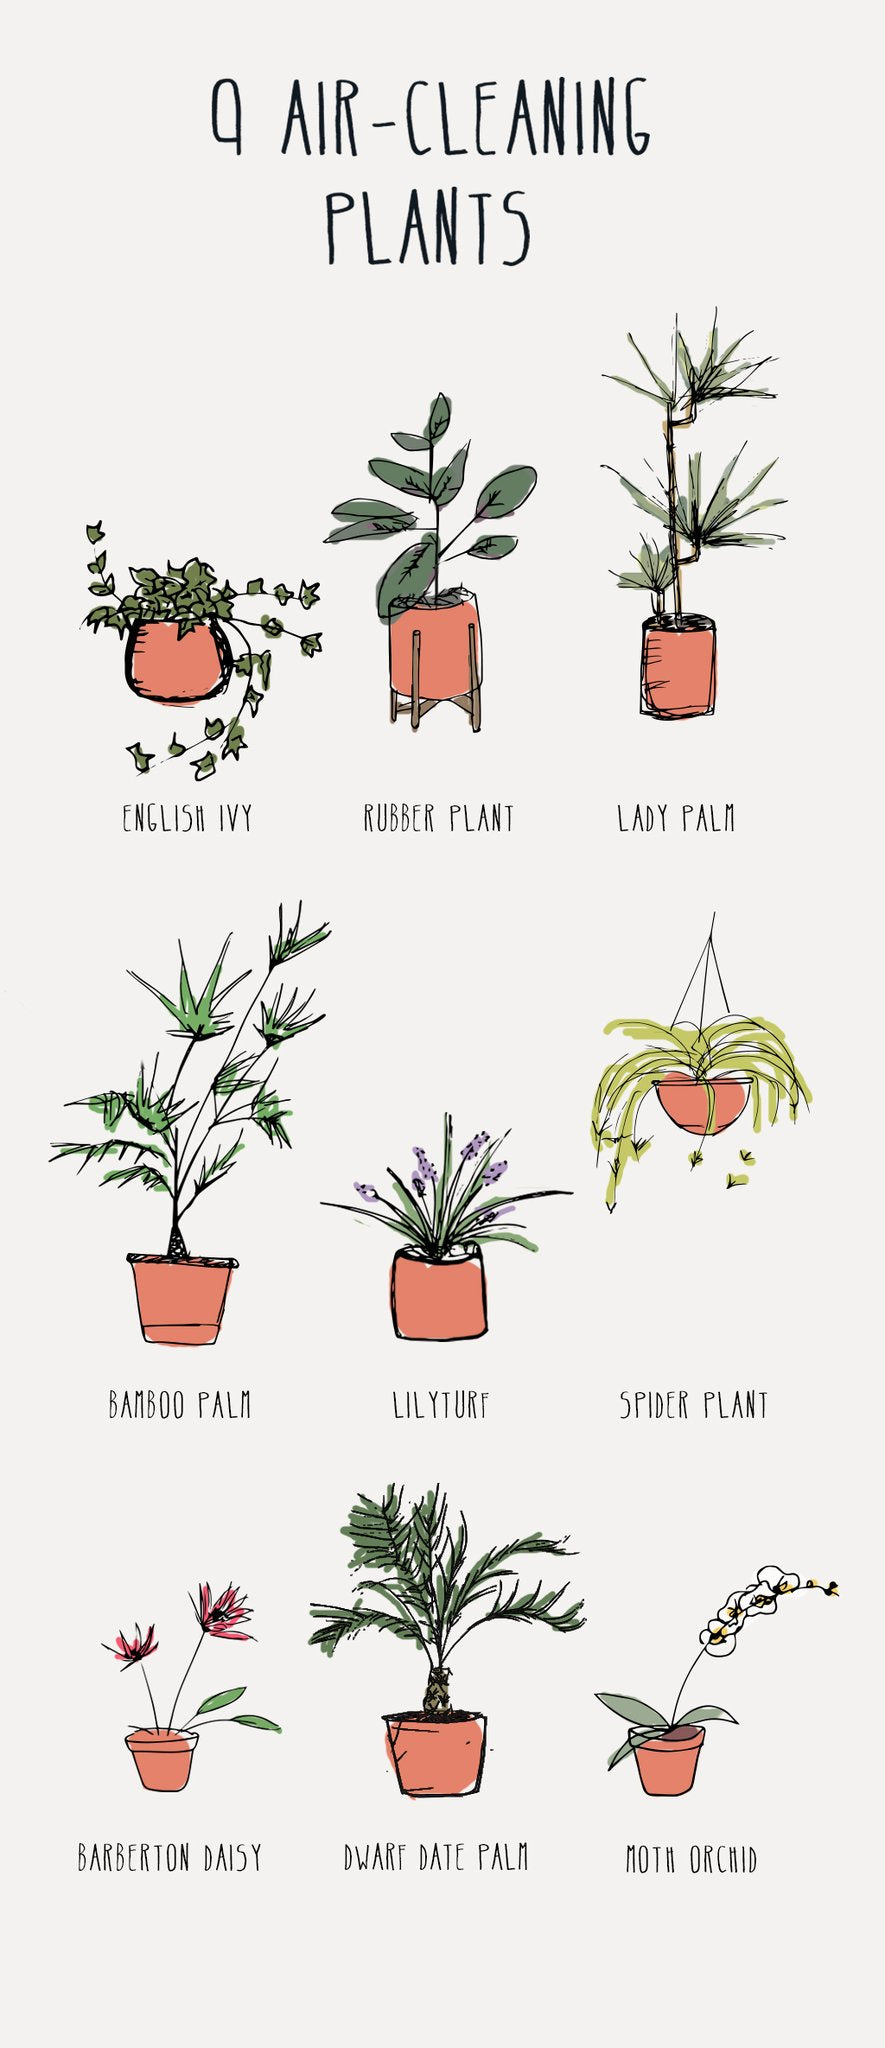 9 Best Air-Cleaning Plants